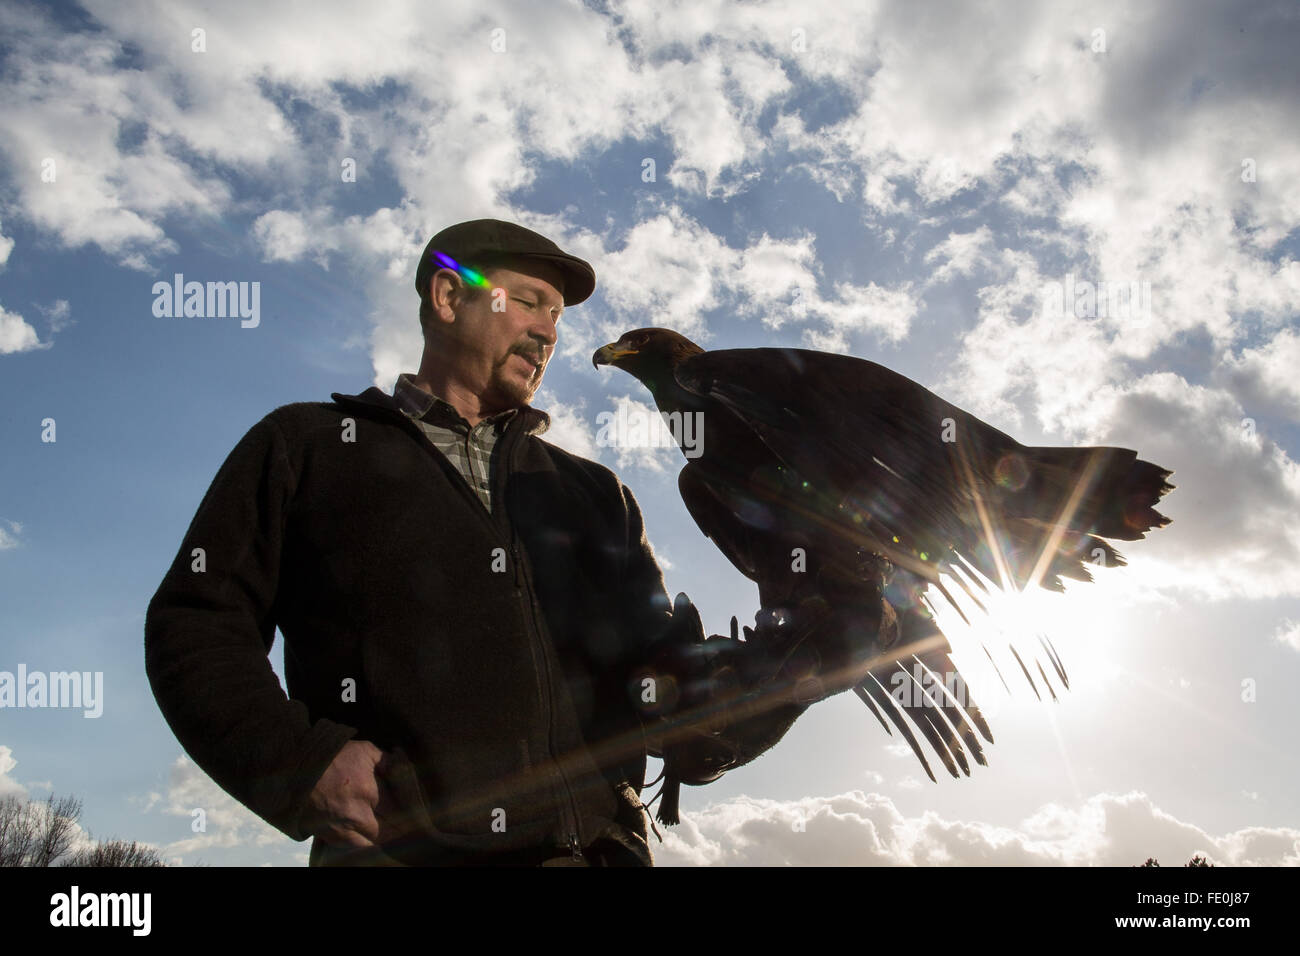 Dortmund, Germany. 3rd Feb, 2016. Falconer Frank Schaumann poses with his golden eagle Hector at a press event for the hunting and fishing double trade fair 'Jagd und Hund' and 'Fisch und Angel' in Dortmund, Germany, 3 February 2016. The trade fair runs from 09 February until 14 February 2016. PHOTO: MAJA HITIJ/DPA/Alamy Live News Stock Photo